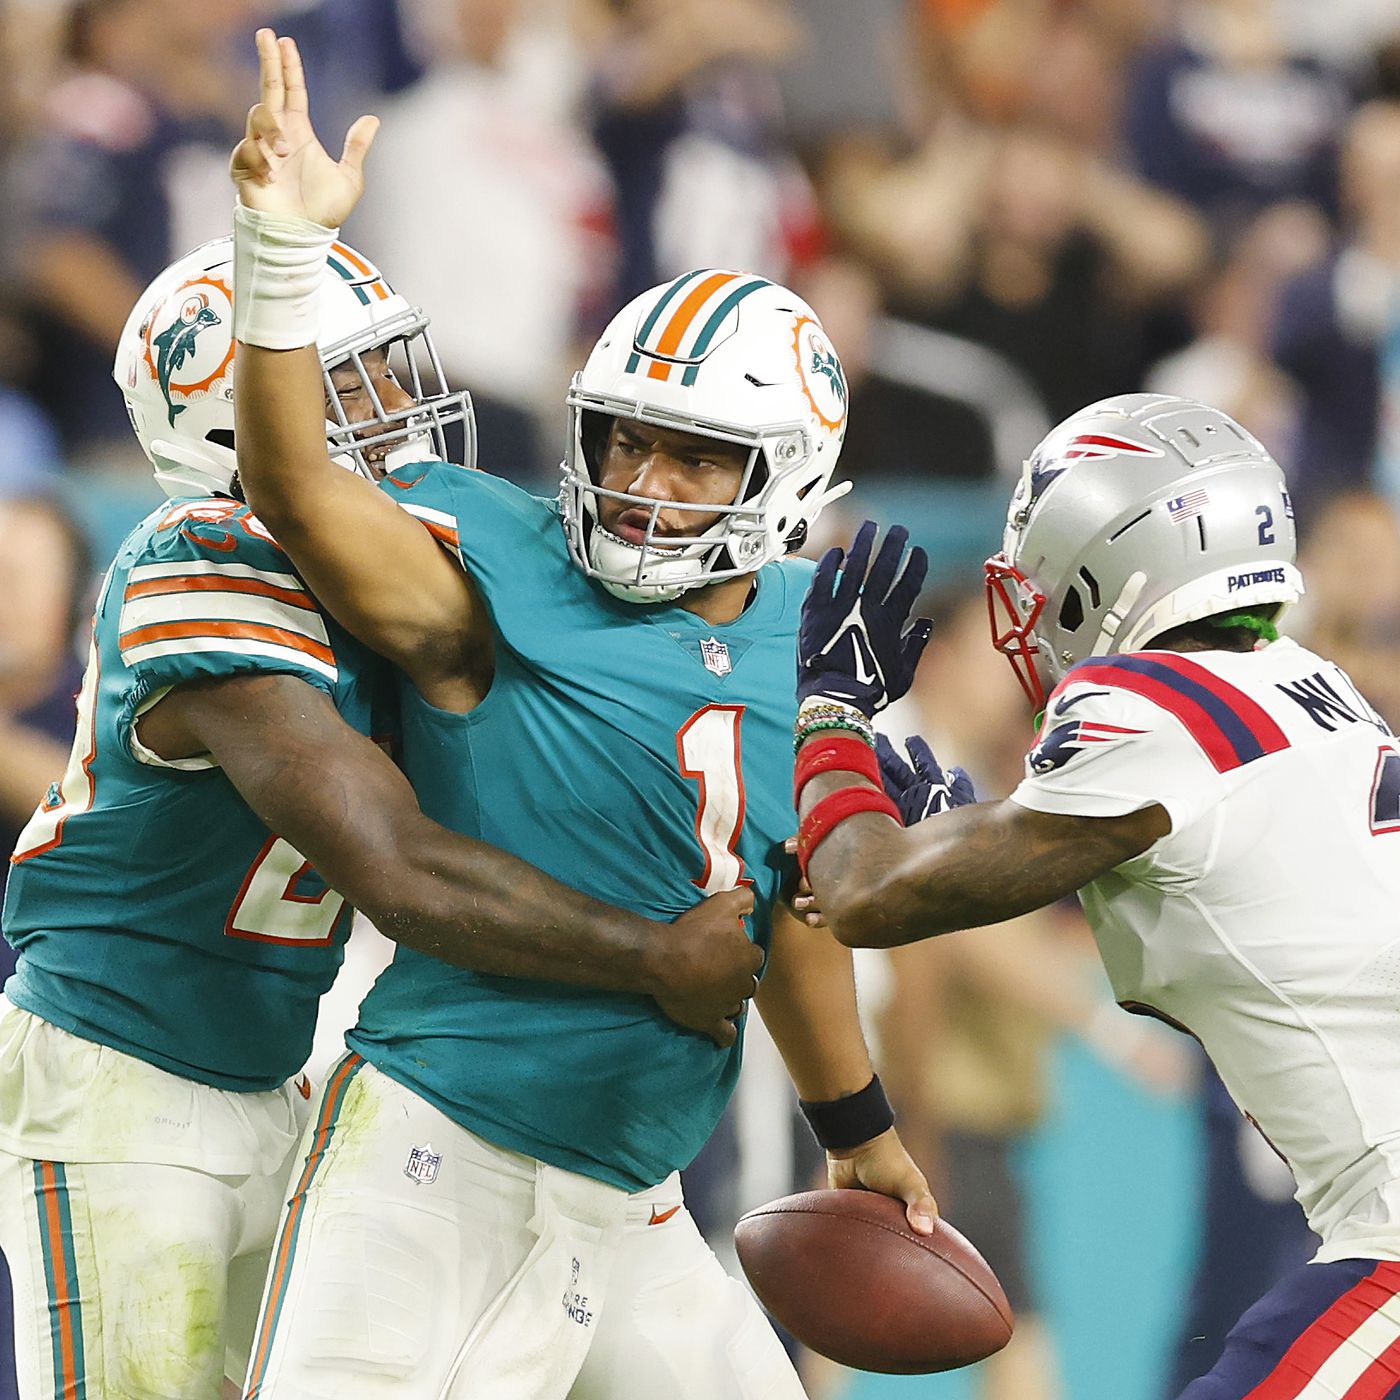 Miami Dolphins Schedule 2022 2023 Dolphins 2022 Schedule: Opponents Set For Next Year - The Phinsider